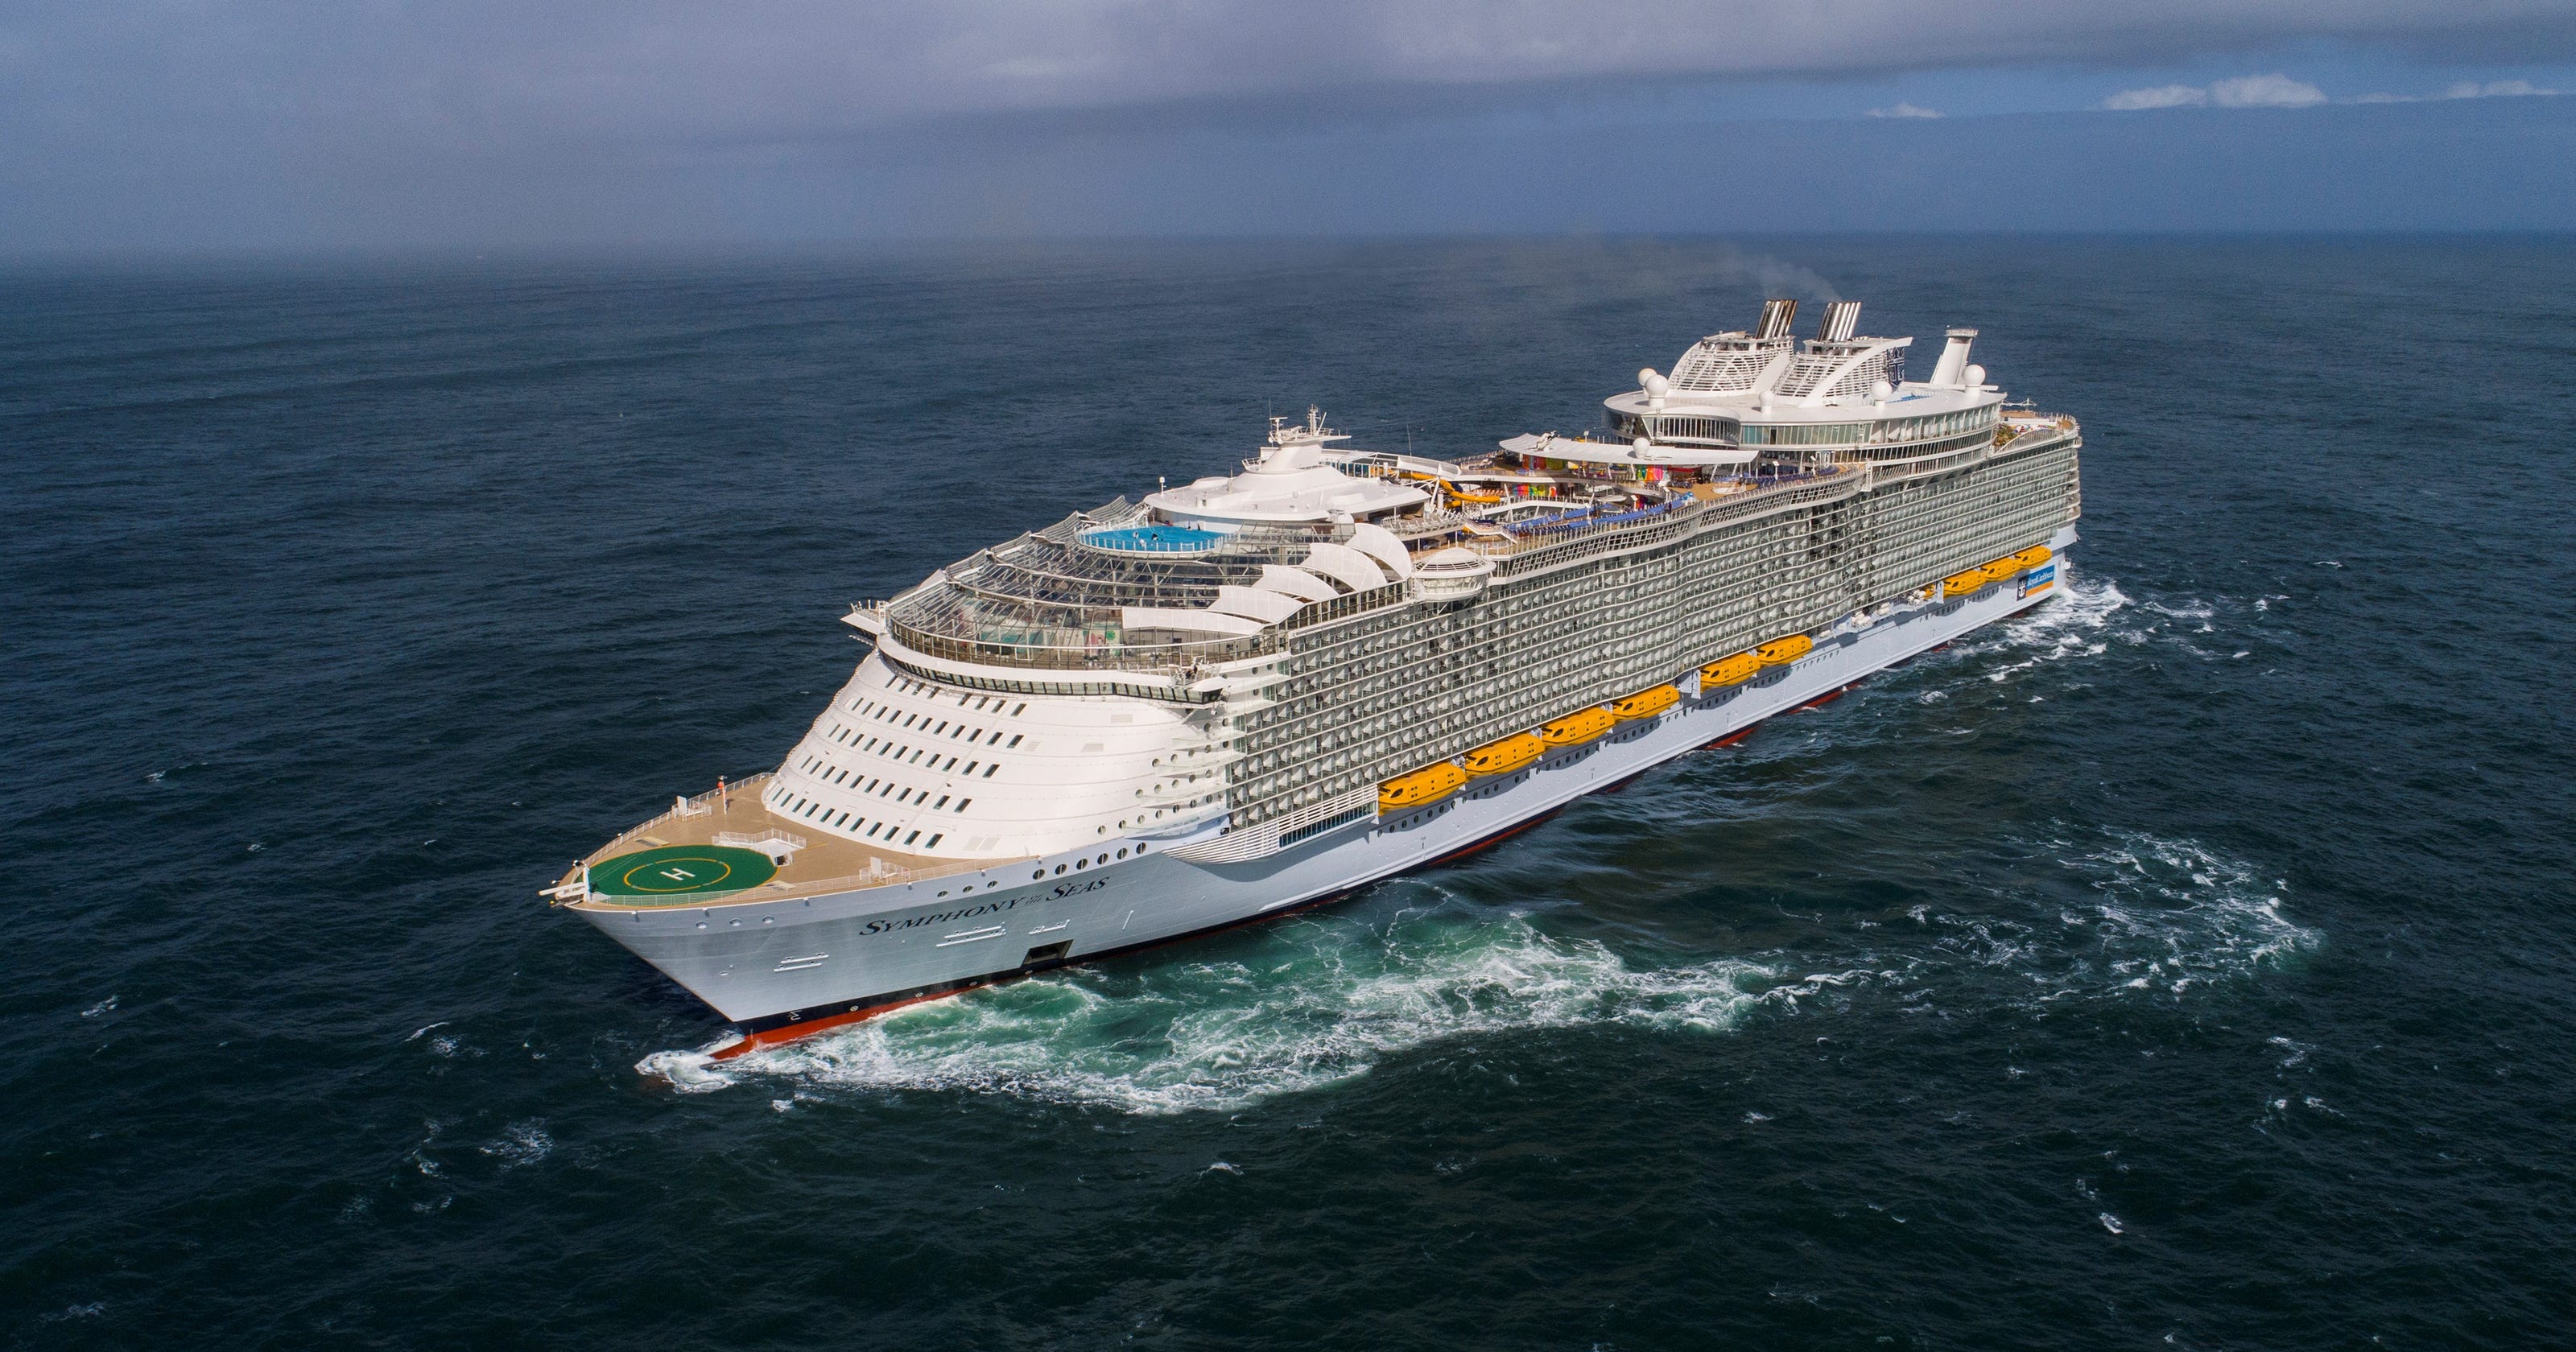 Symphony of the Seas: First look at giant Royal Caribbean new ship